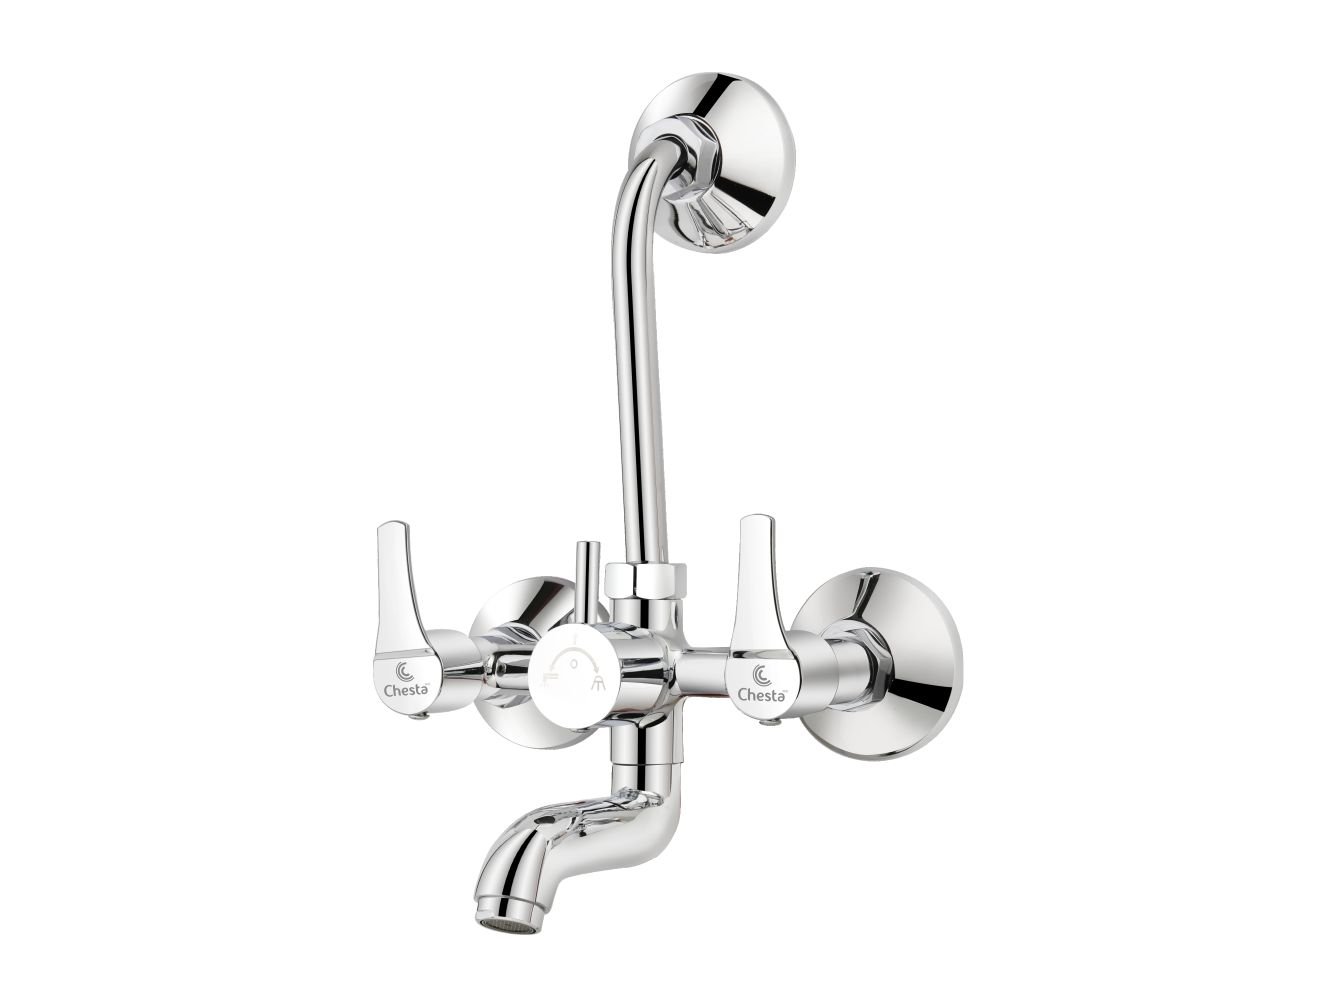 ST - 1025 - Wall Mixer 2 in 1 with L Bend at Chesta Bath